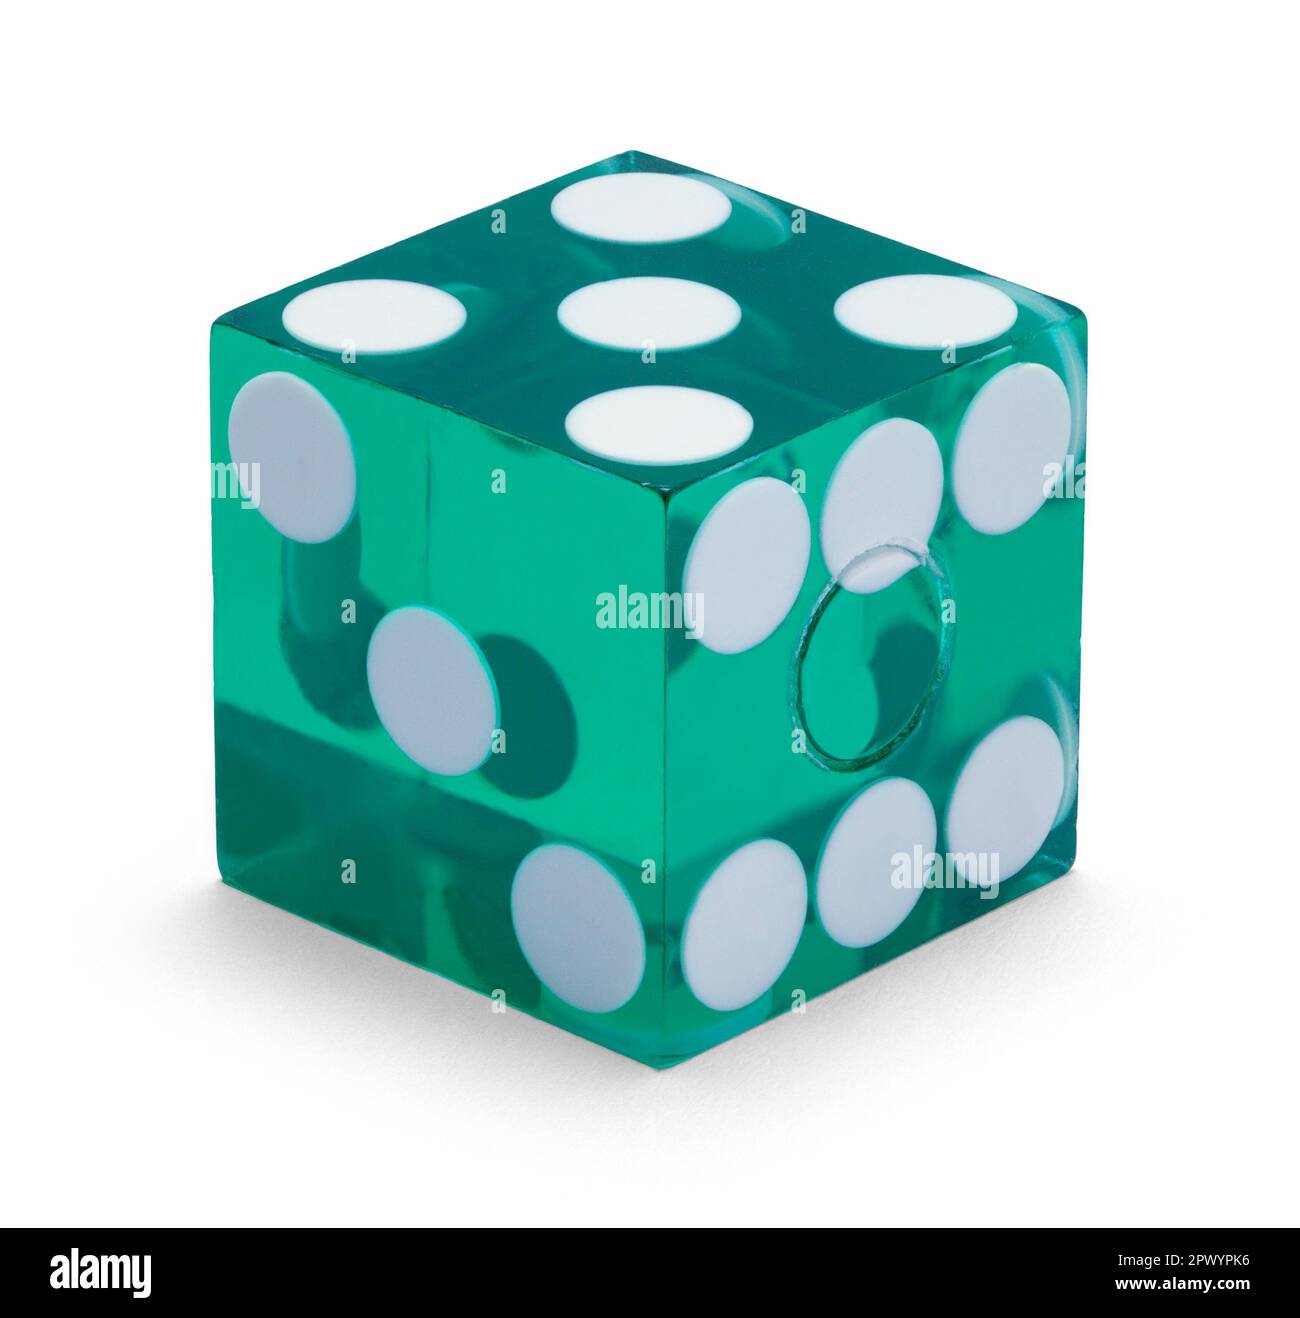 Single Green Dice Cut Out on White. Stock Photo